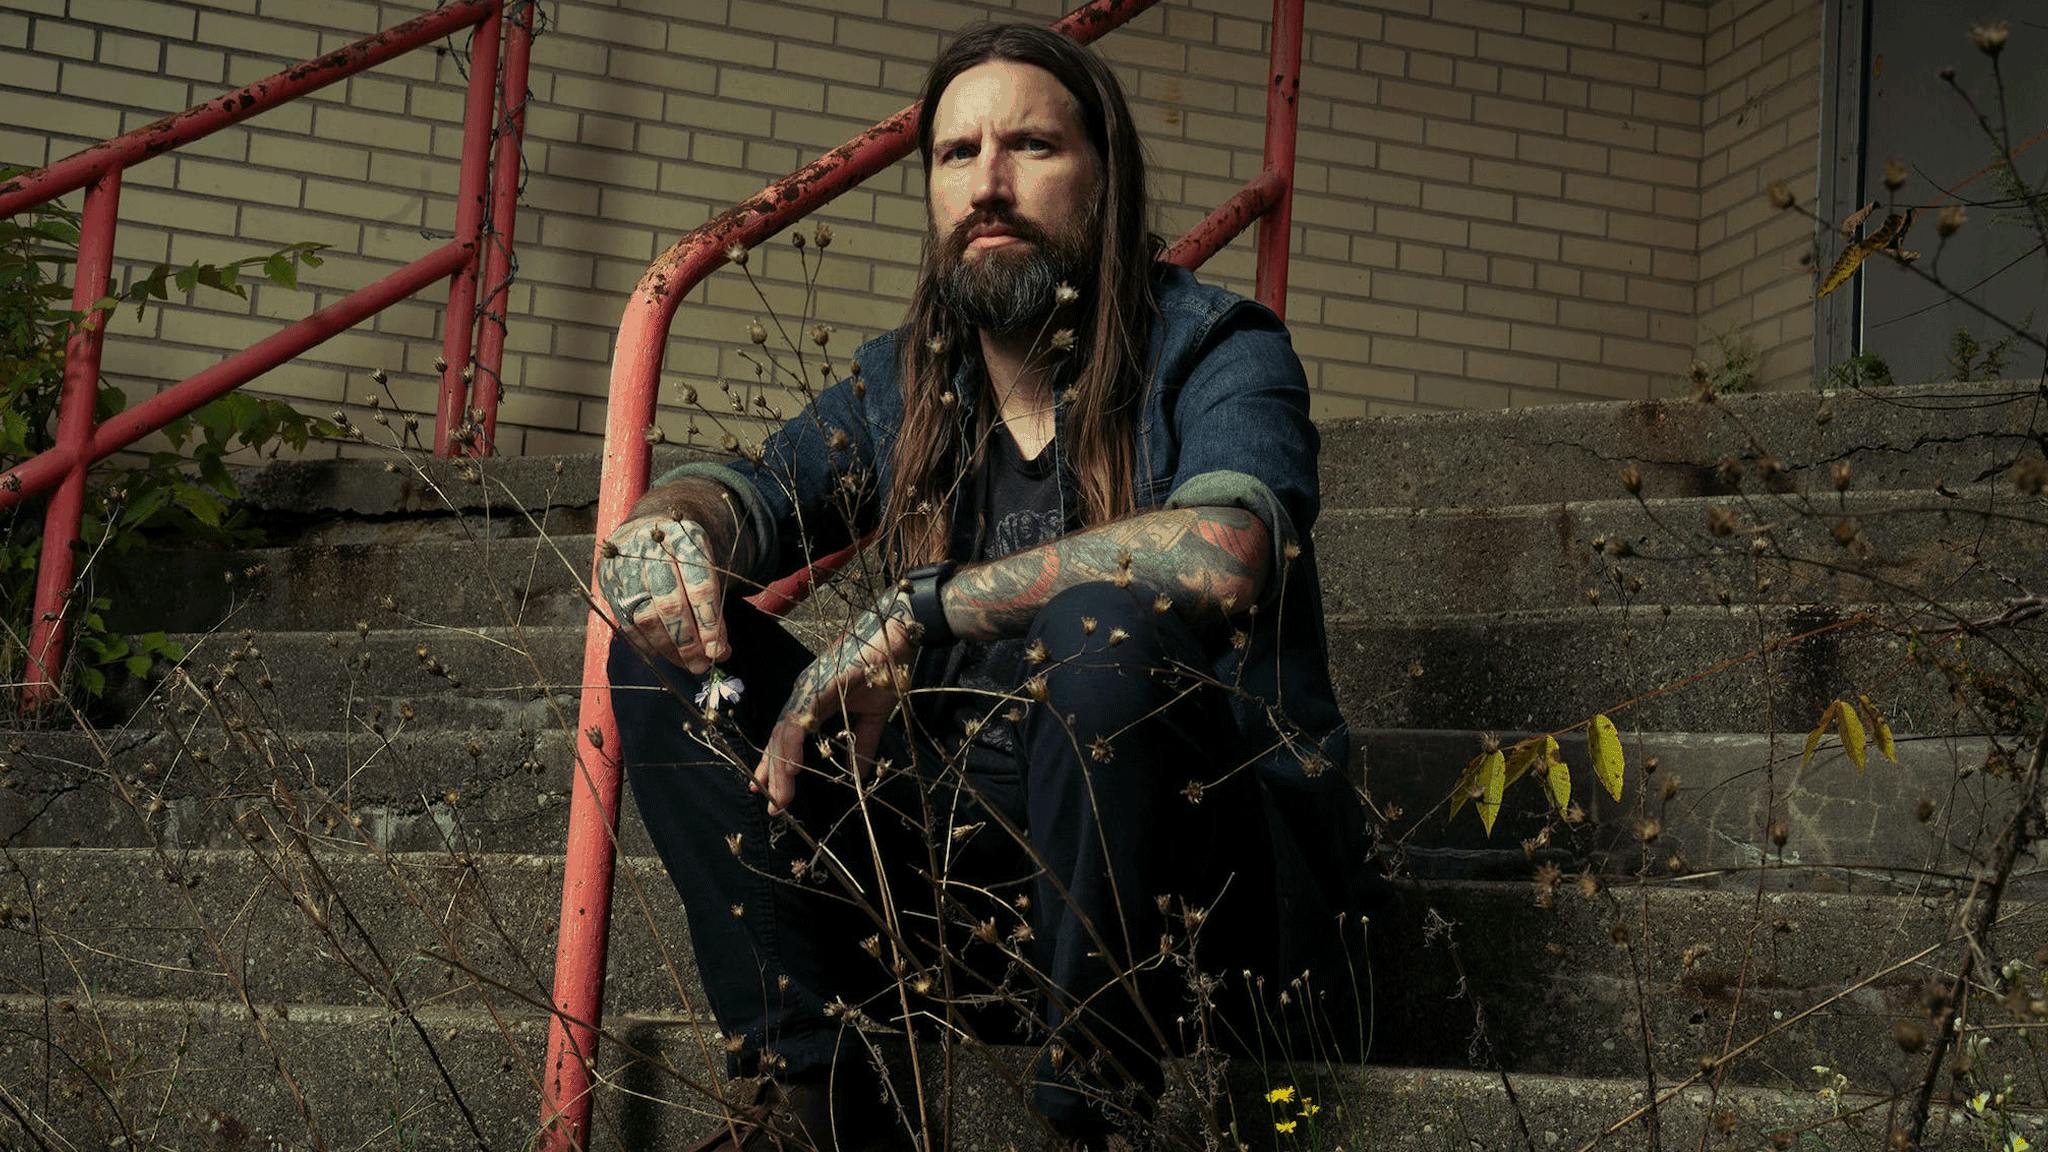 Ex-Every Time I Die vocalist Keith Buckley announces new band, Many Eyes